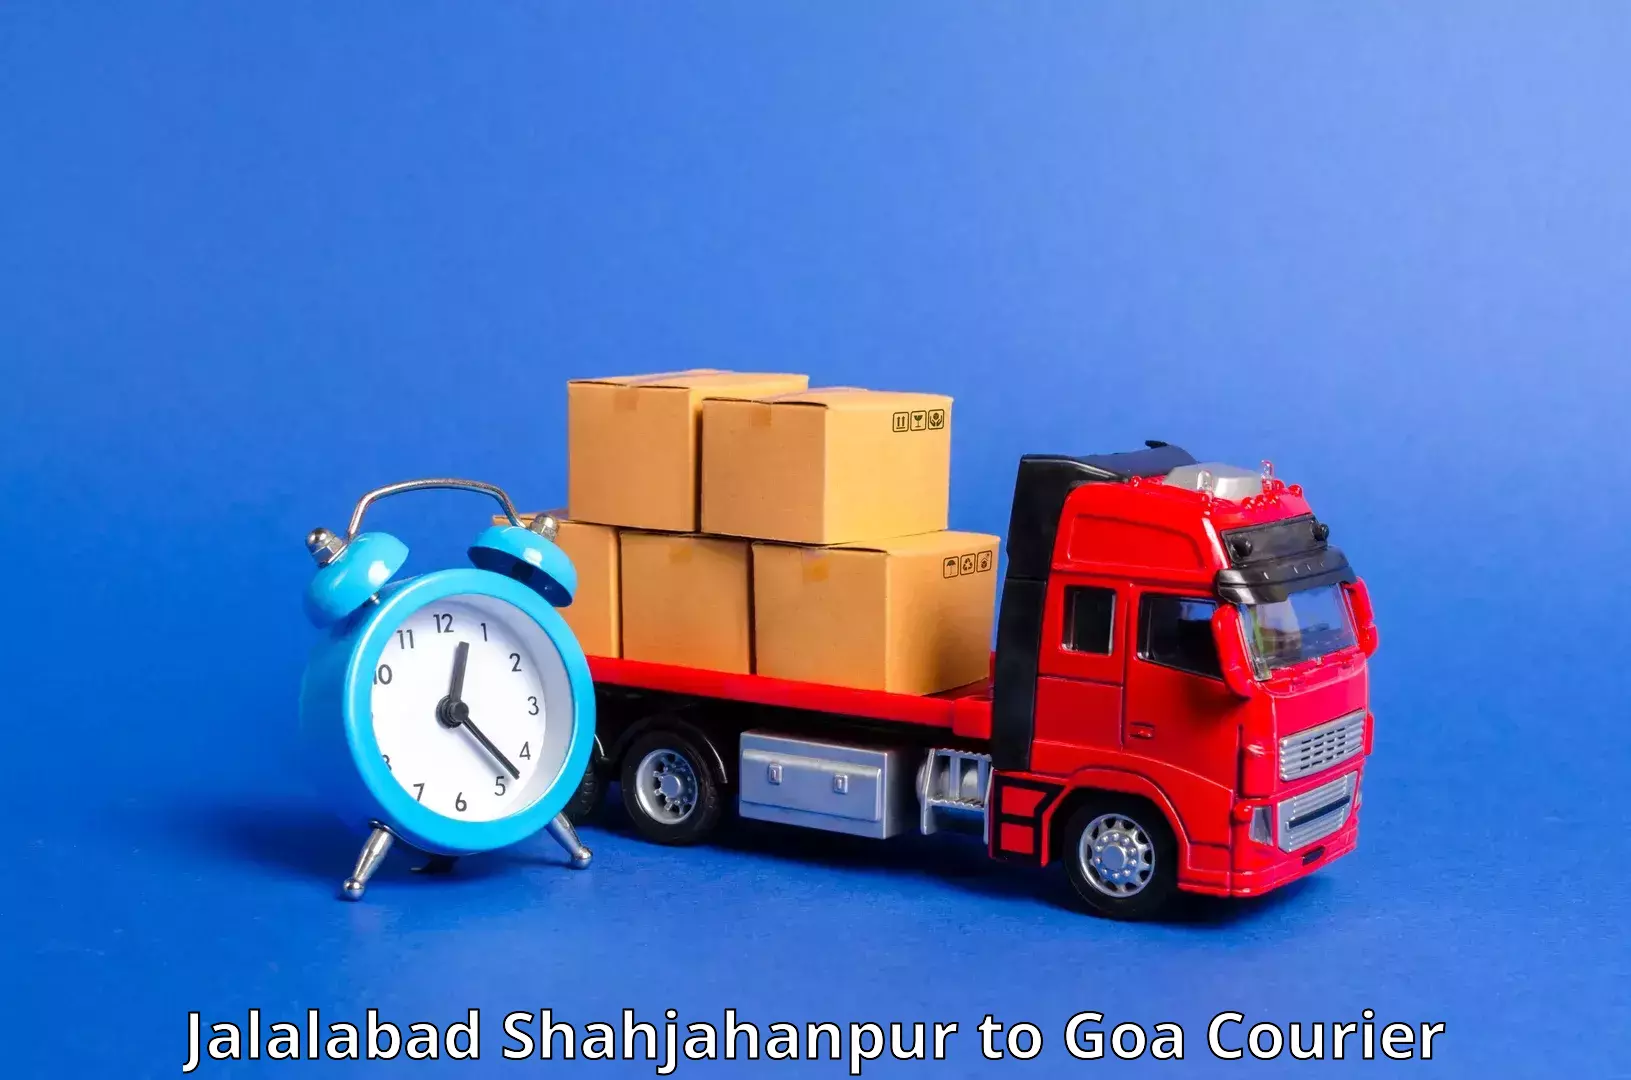 Fastest parcel delivery in Jalalabad Shahjahanpur to Bicholim